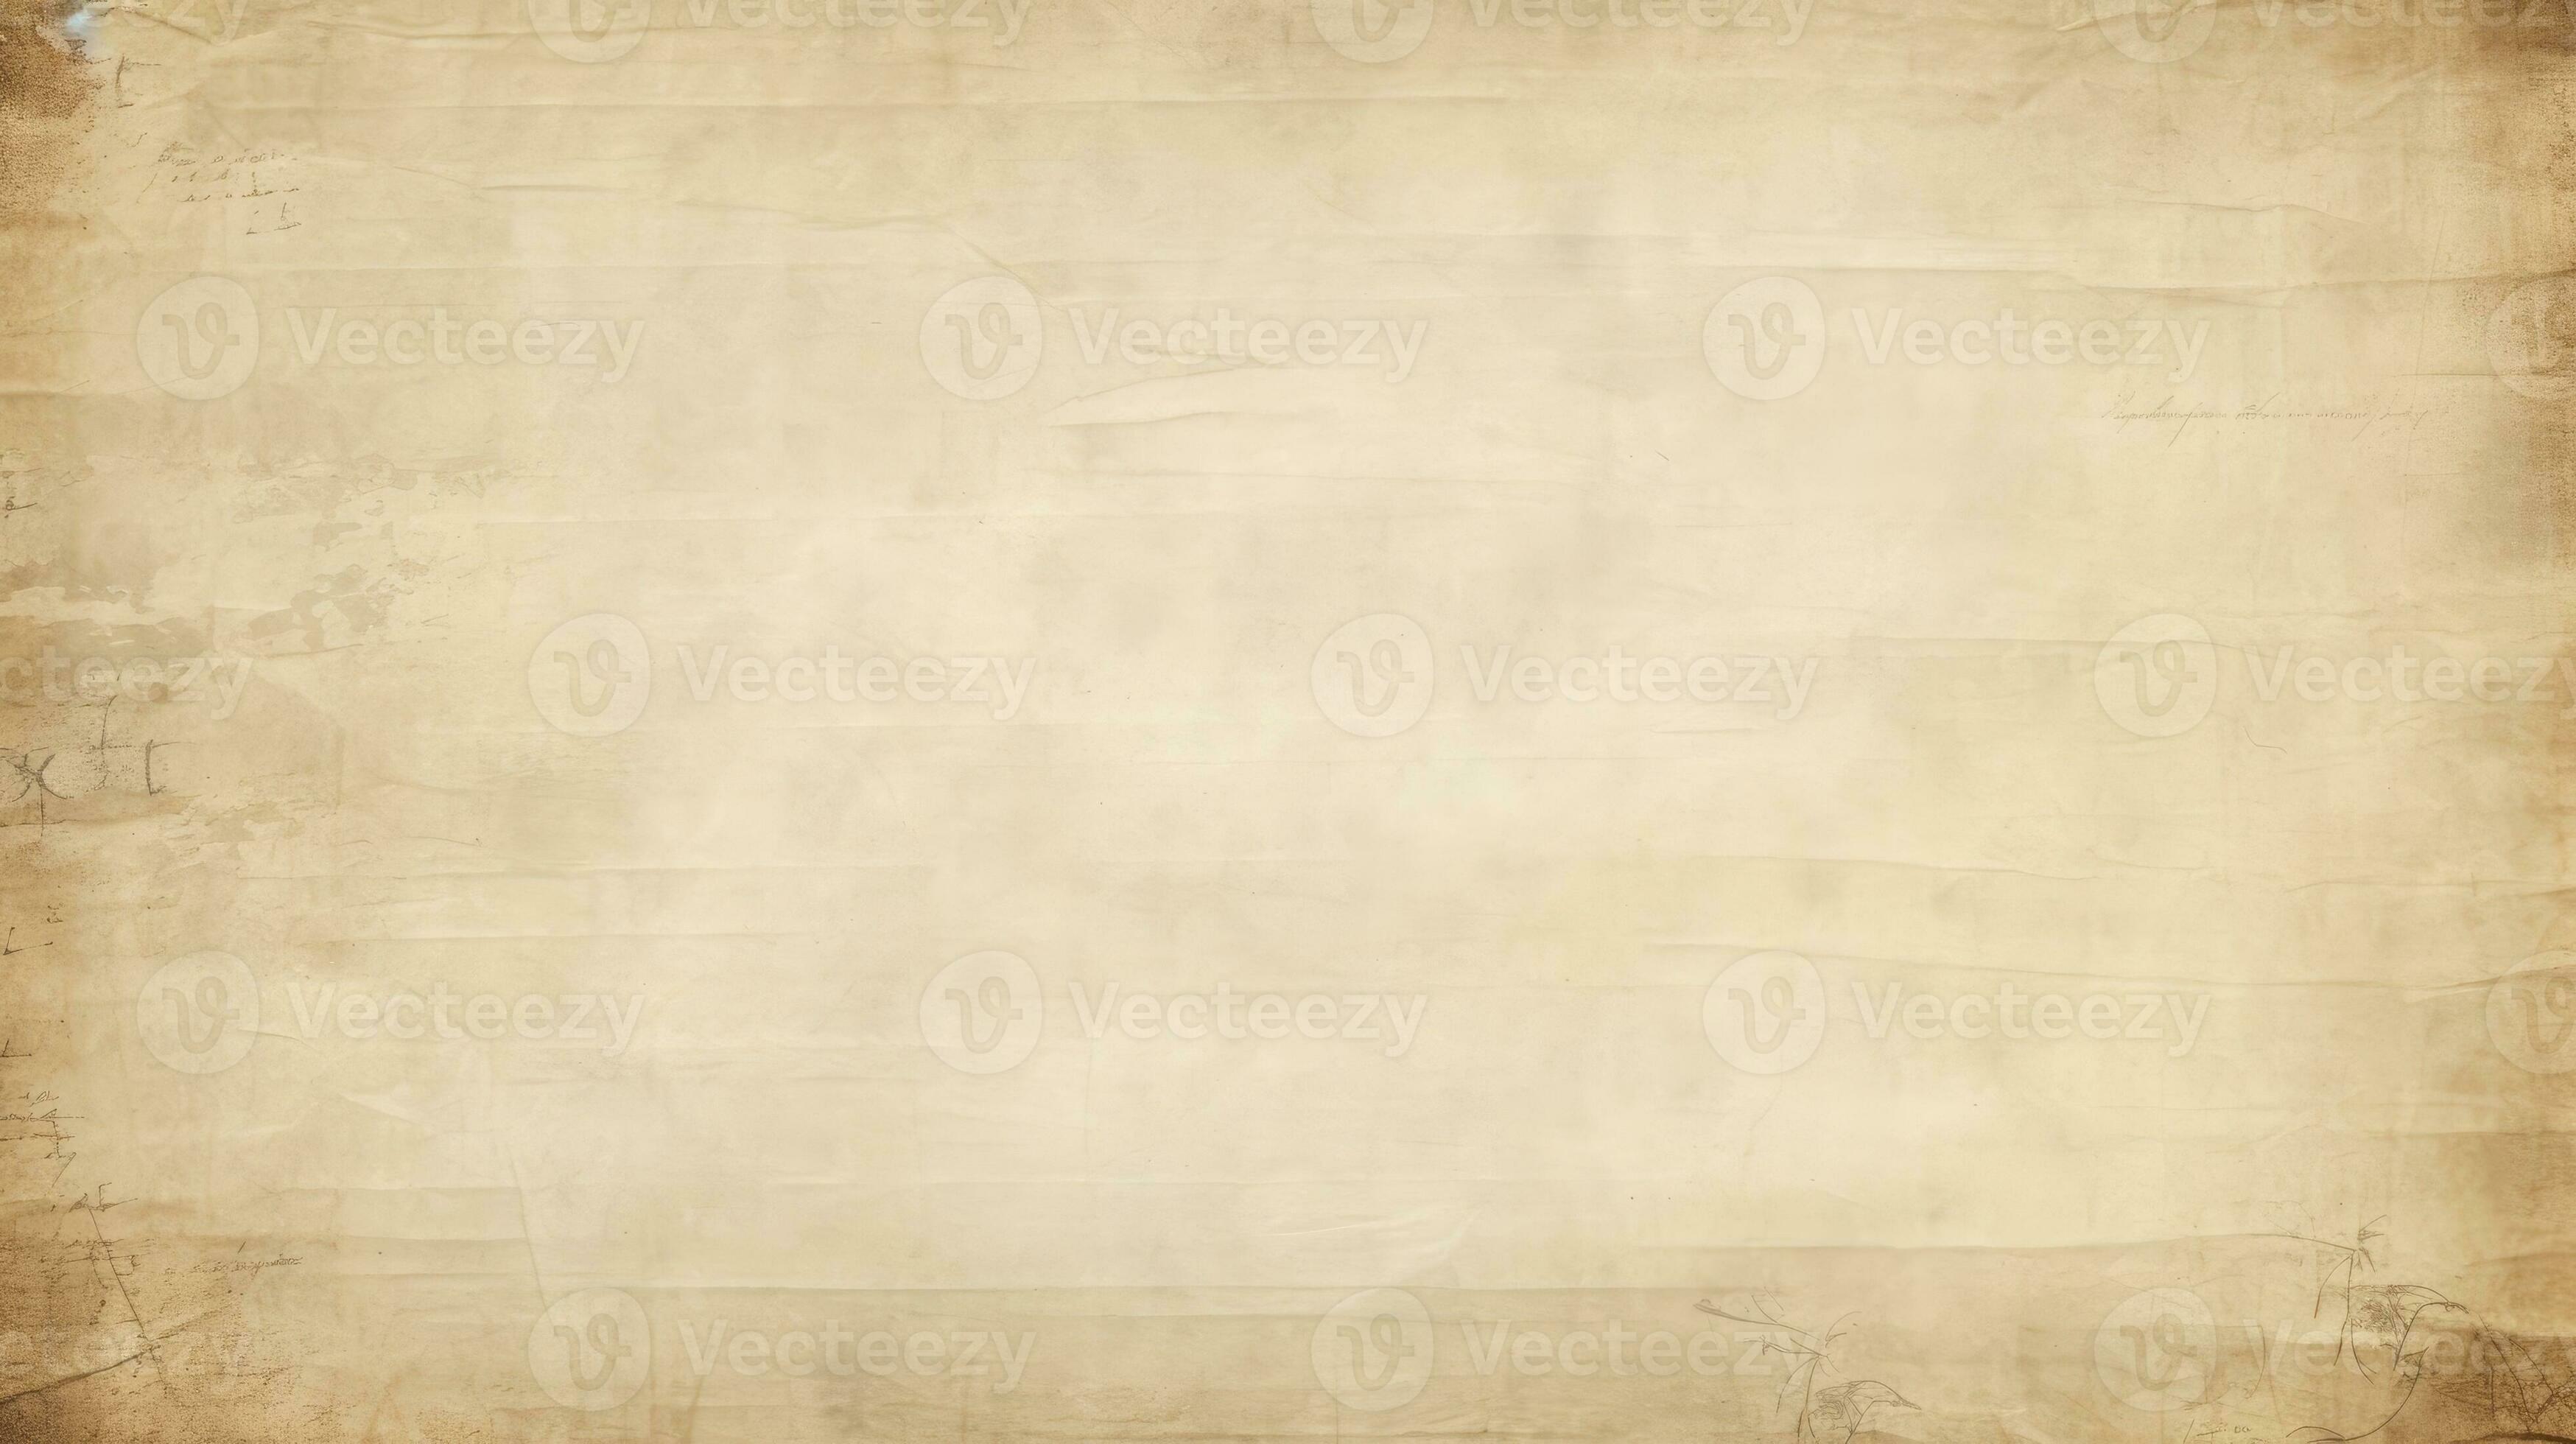 Photo of Rustic Parchment Paper Background